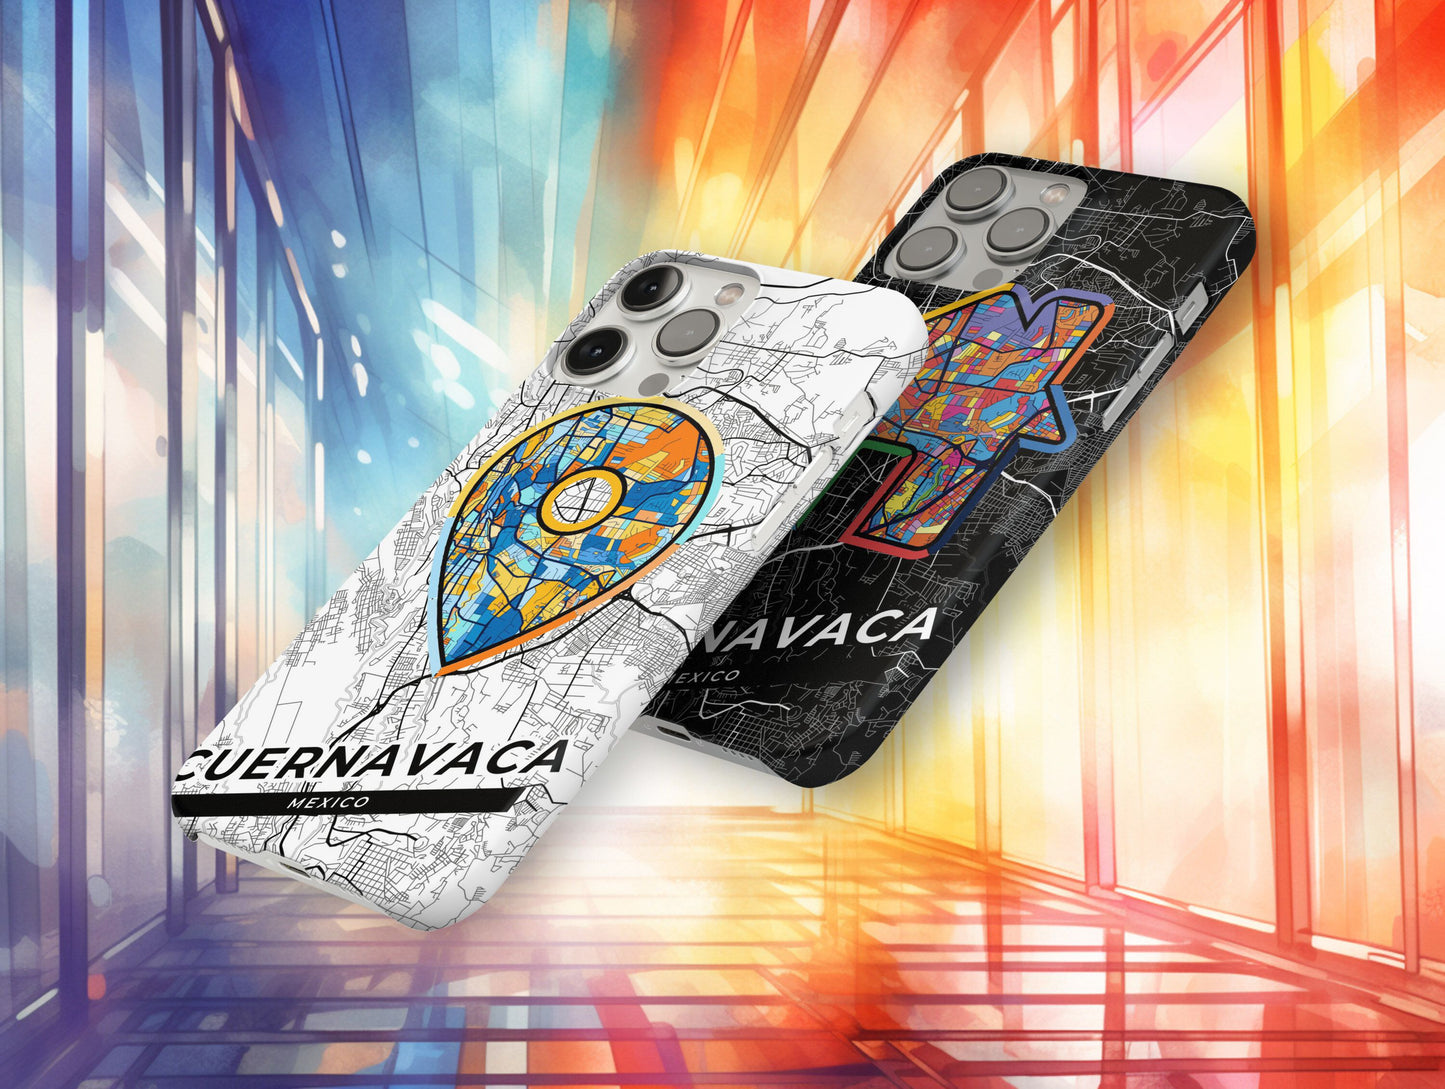 Cuernavaca Mexico slim phone case with colorful icon. Birthday, wedding or housewarming gift. Couple match cases.